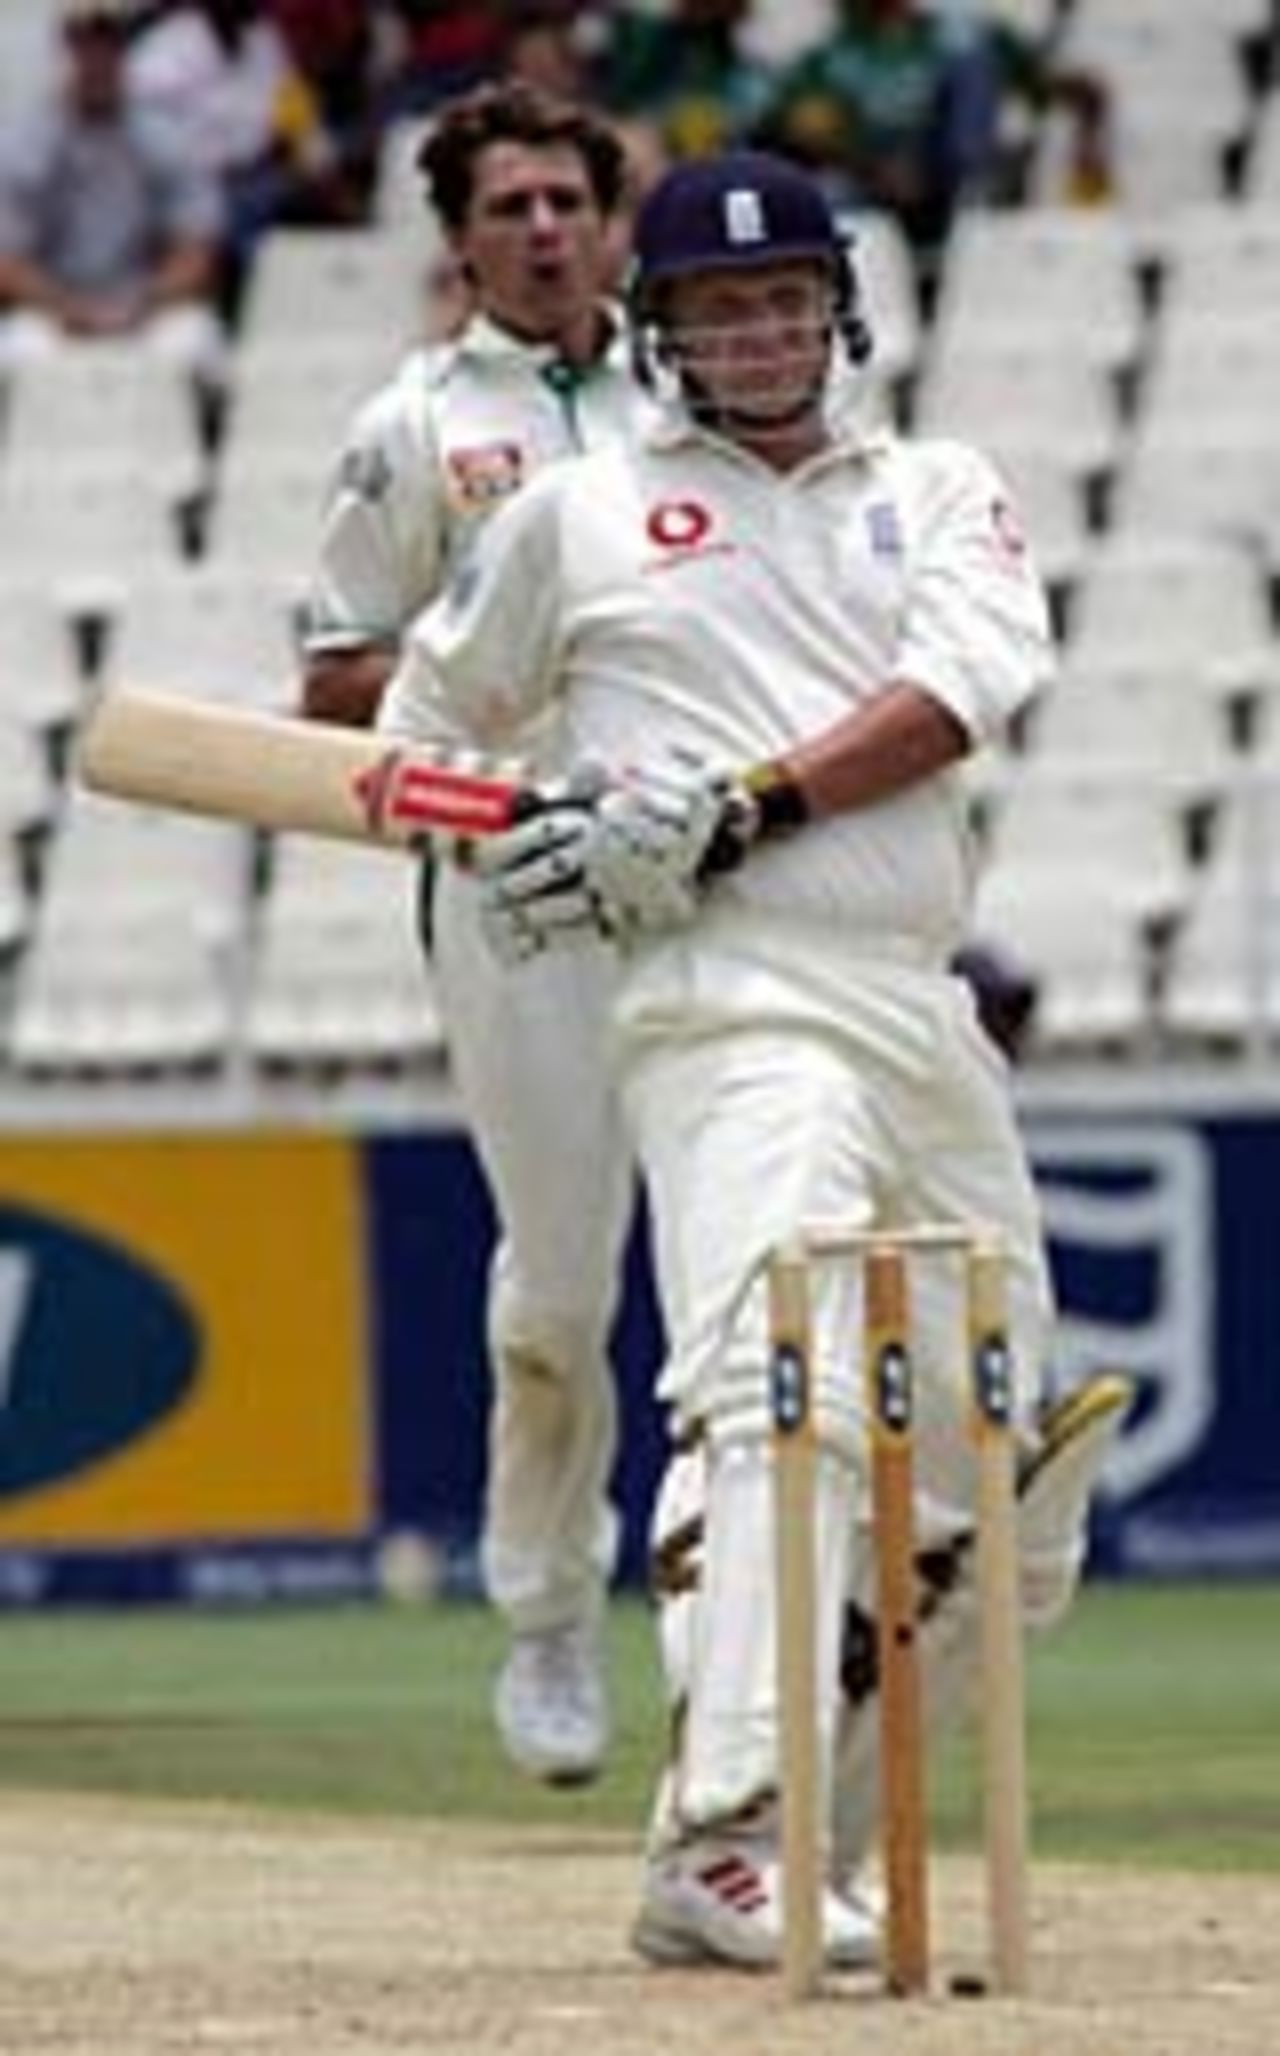 Robert Key veers out the way, South Africa v England, 4th Test, Jo'burg, 1st da, January 13, 2005